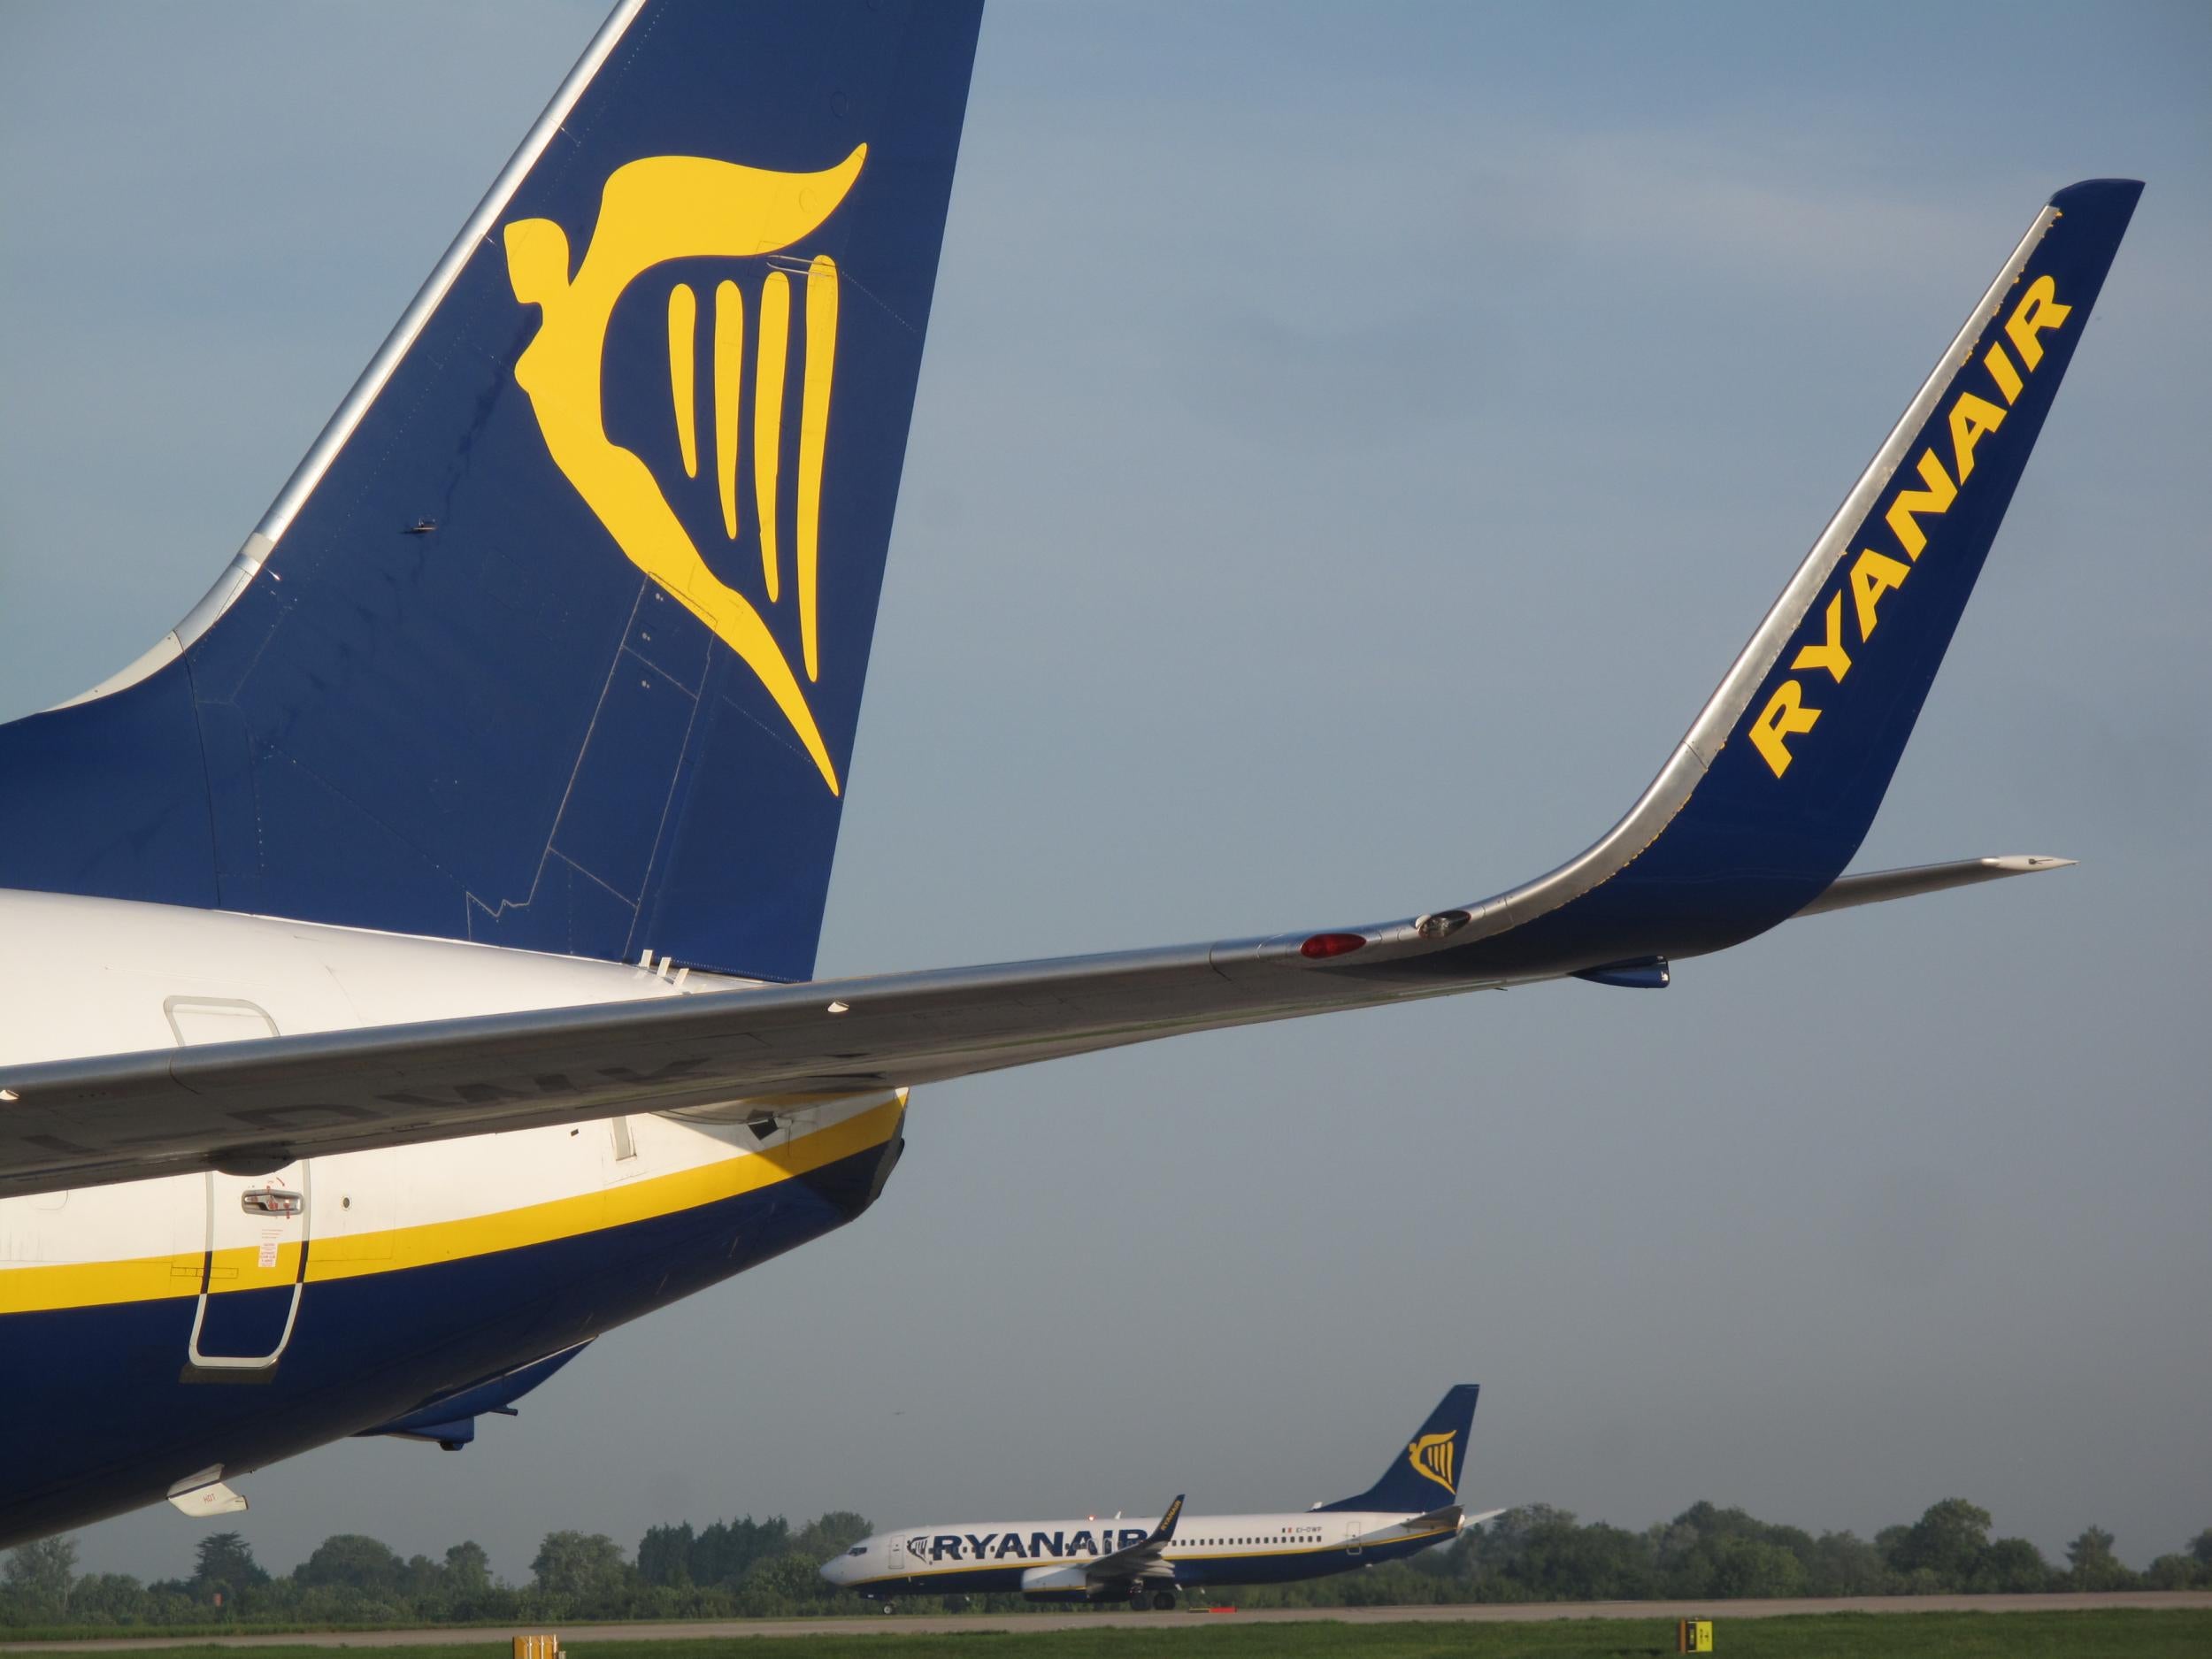 Ryanair is shrinking the window for check-in for passengers who don't pay extra for seating